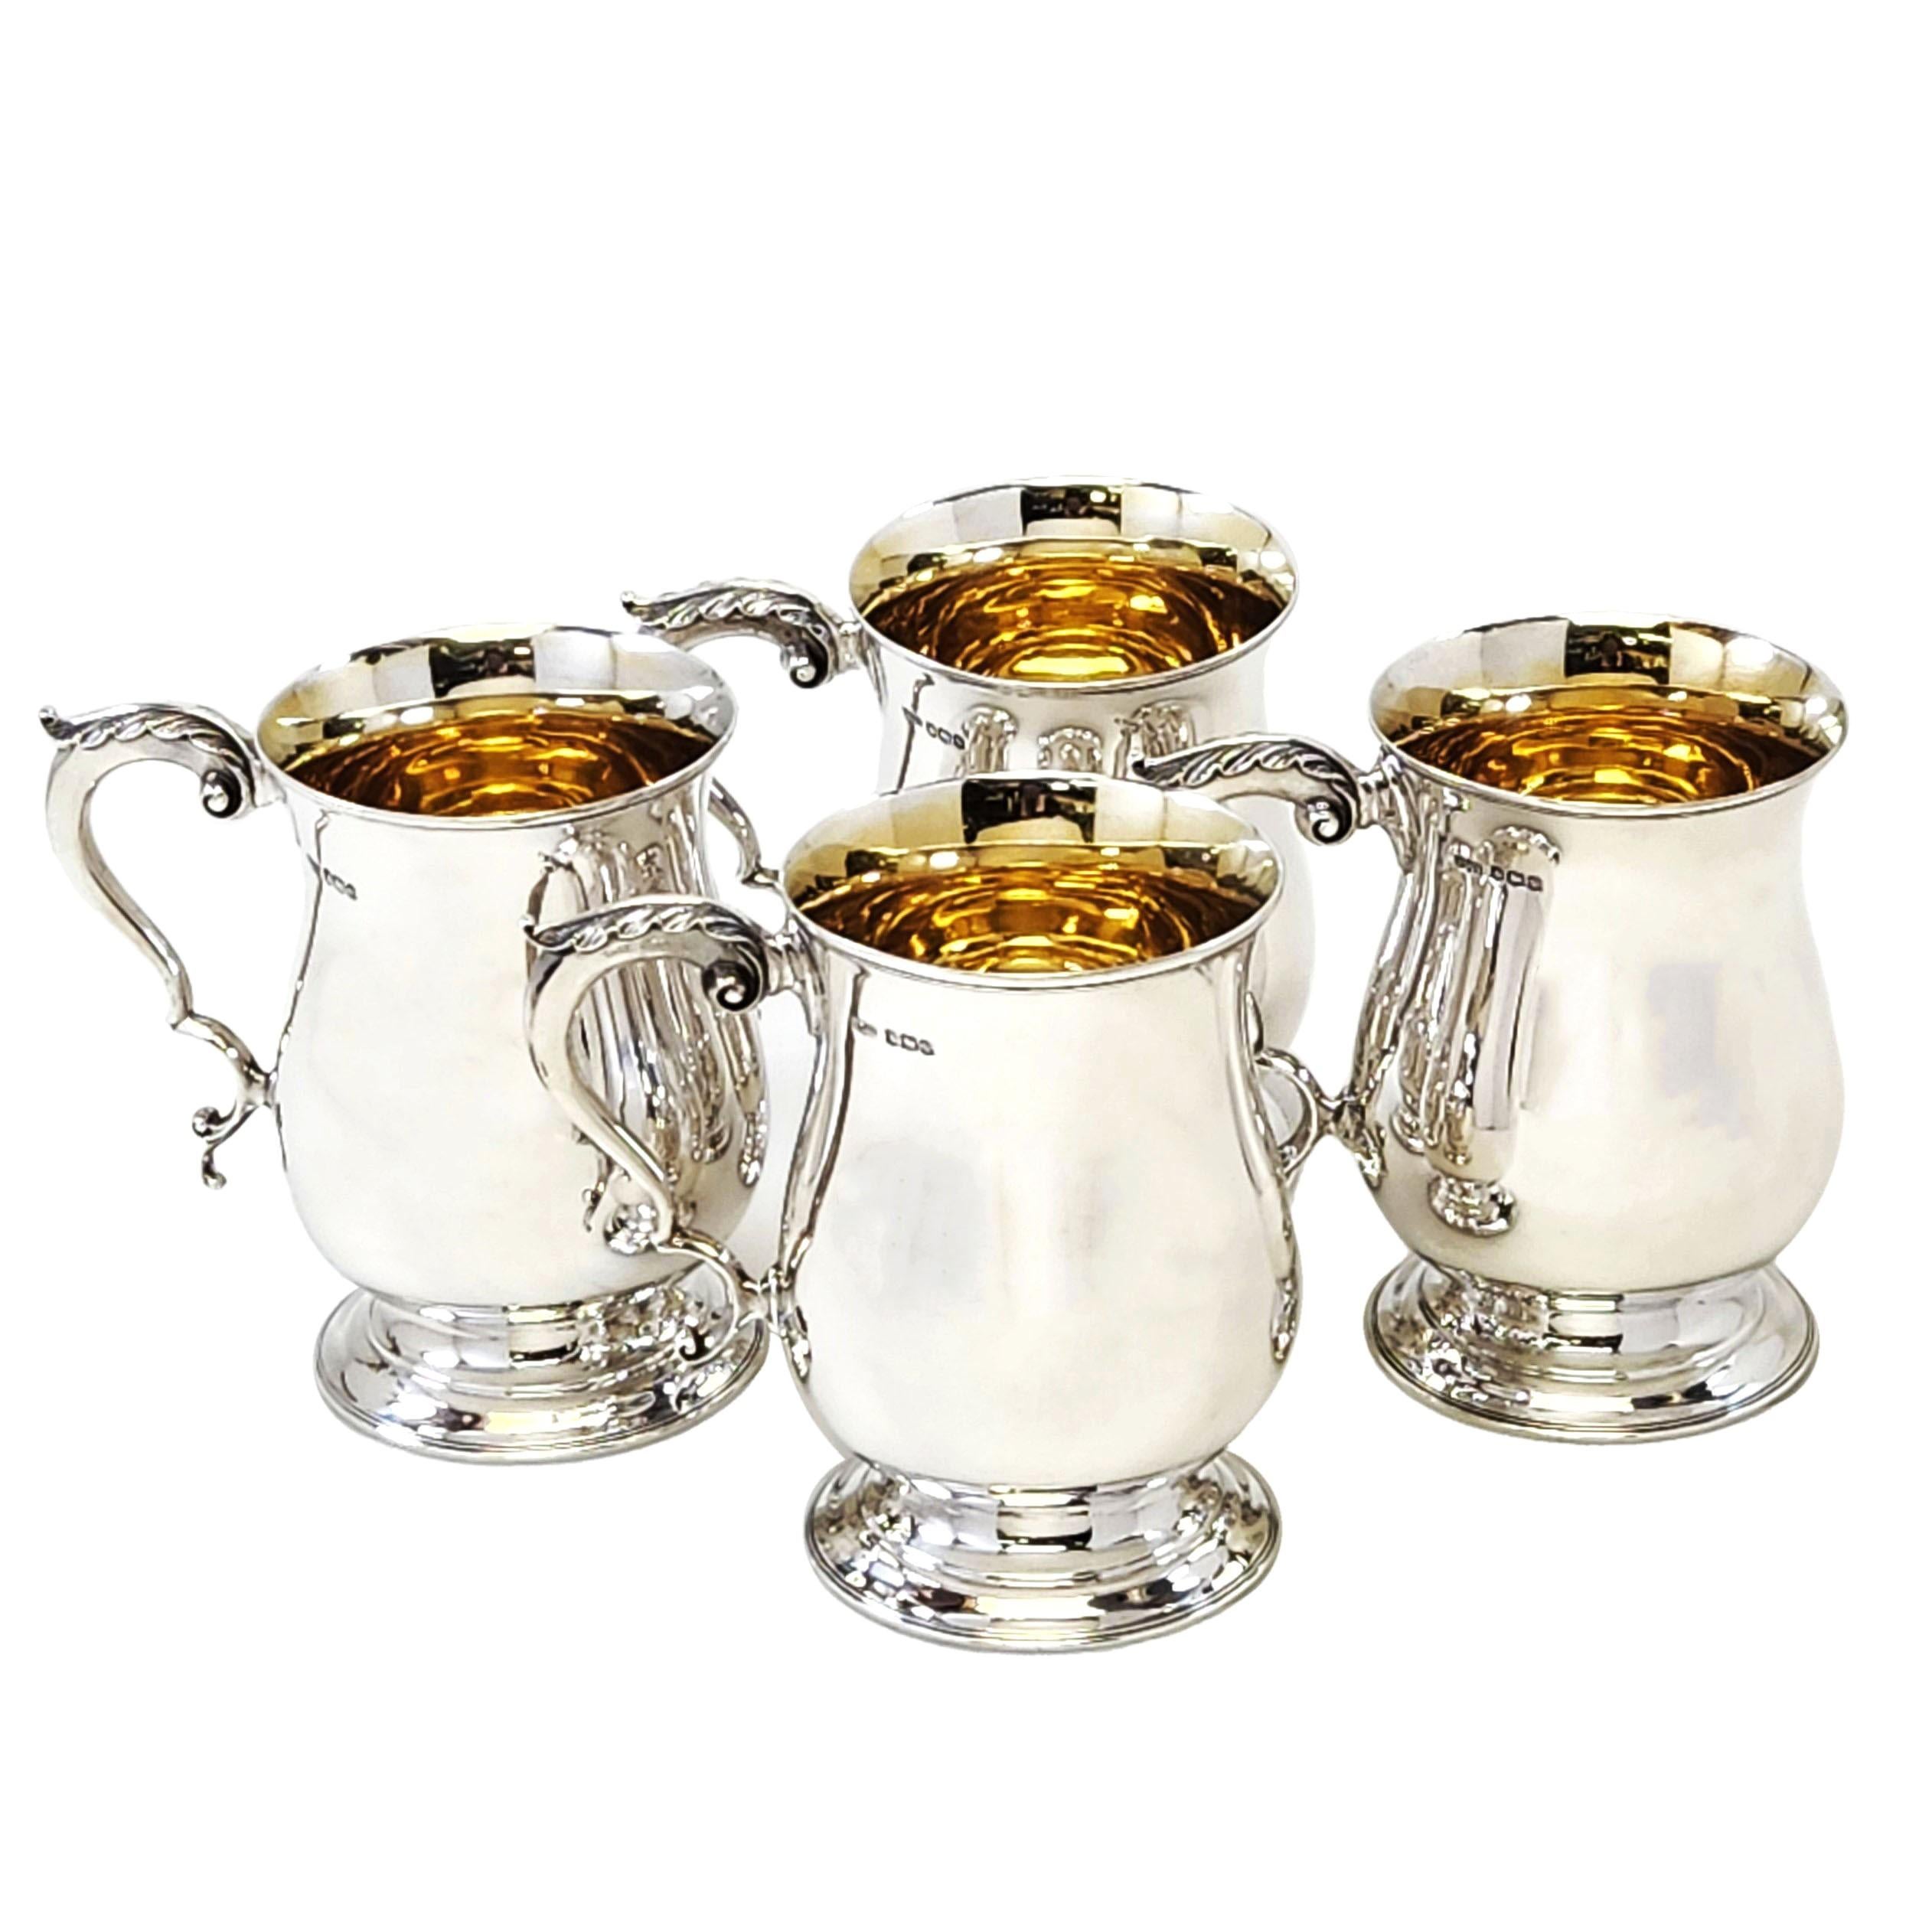 A set of Four Sterling Silver 1/2 Pint Mugs in a traditional Georgian Style, with a polished baluster shaped body, standing on a spread foot and featuring a scroll handle topped with an acanthus leaf. The interior of each Tankard is gilded. The